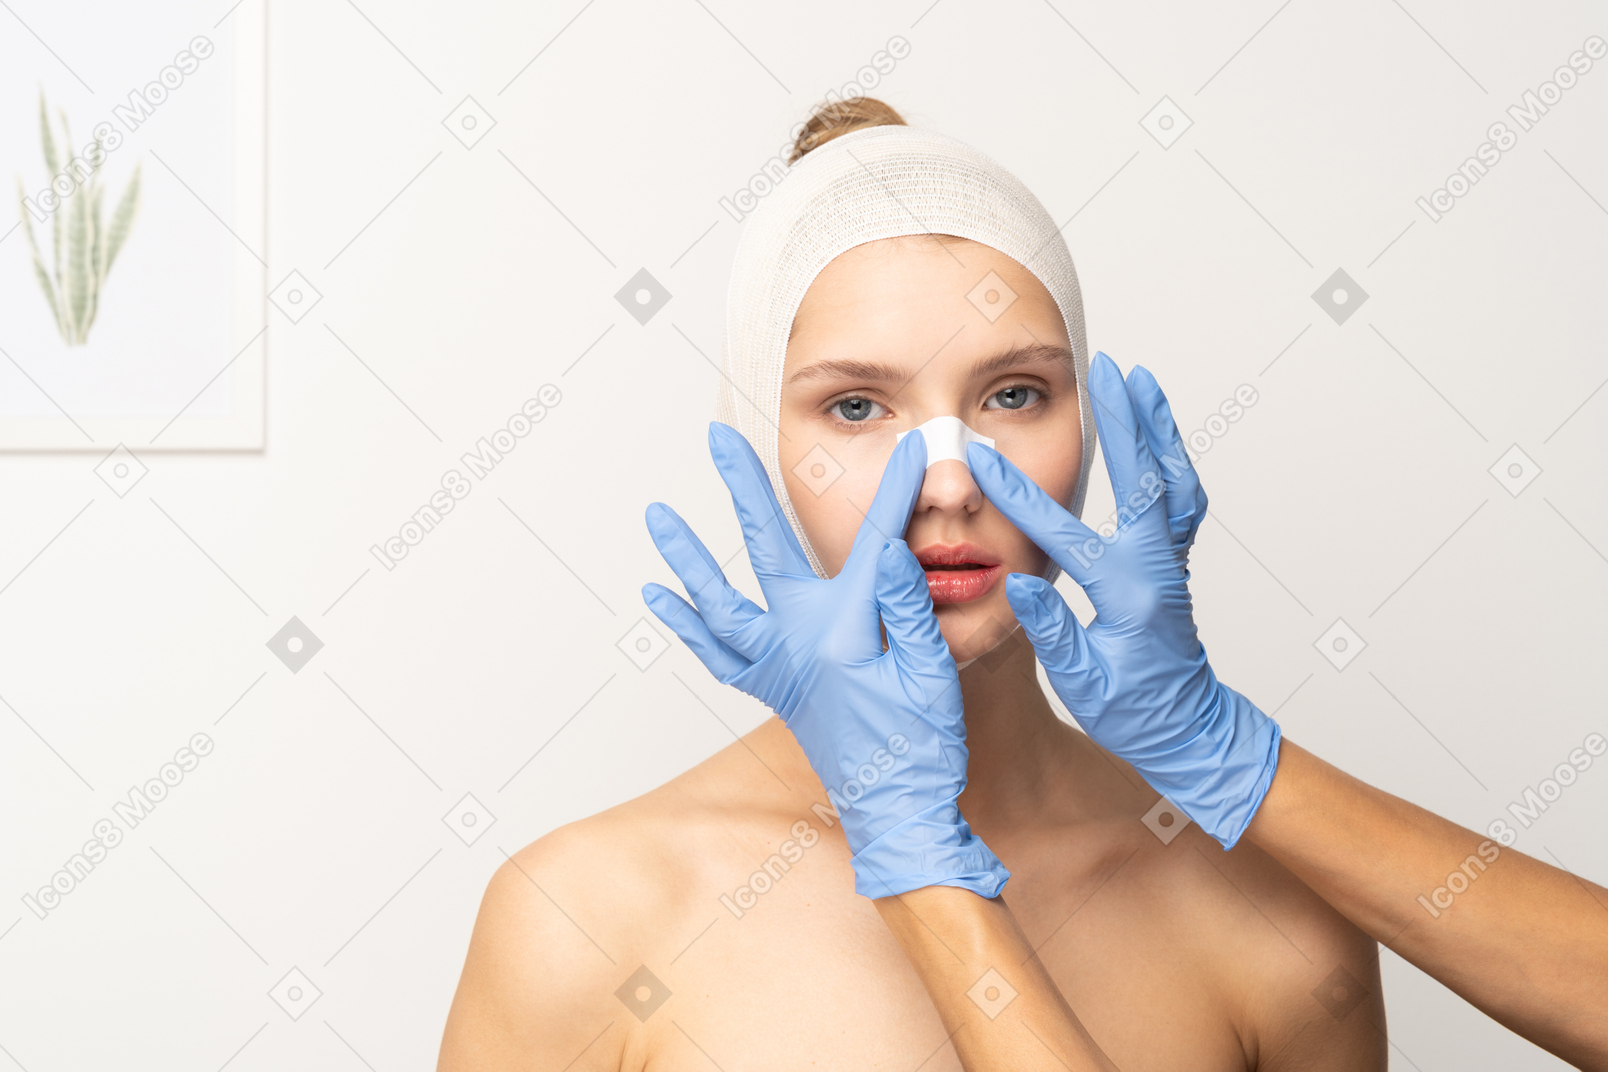 Female patient with hands putting plaster on her nose